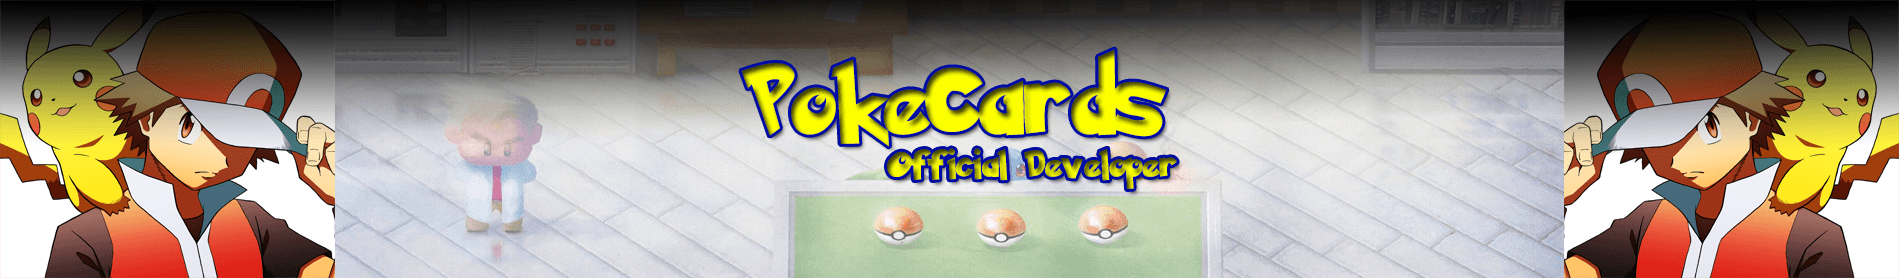 PokeCards_Official banner